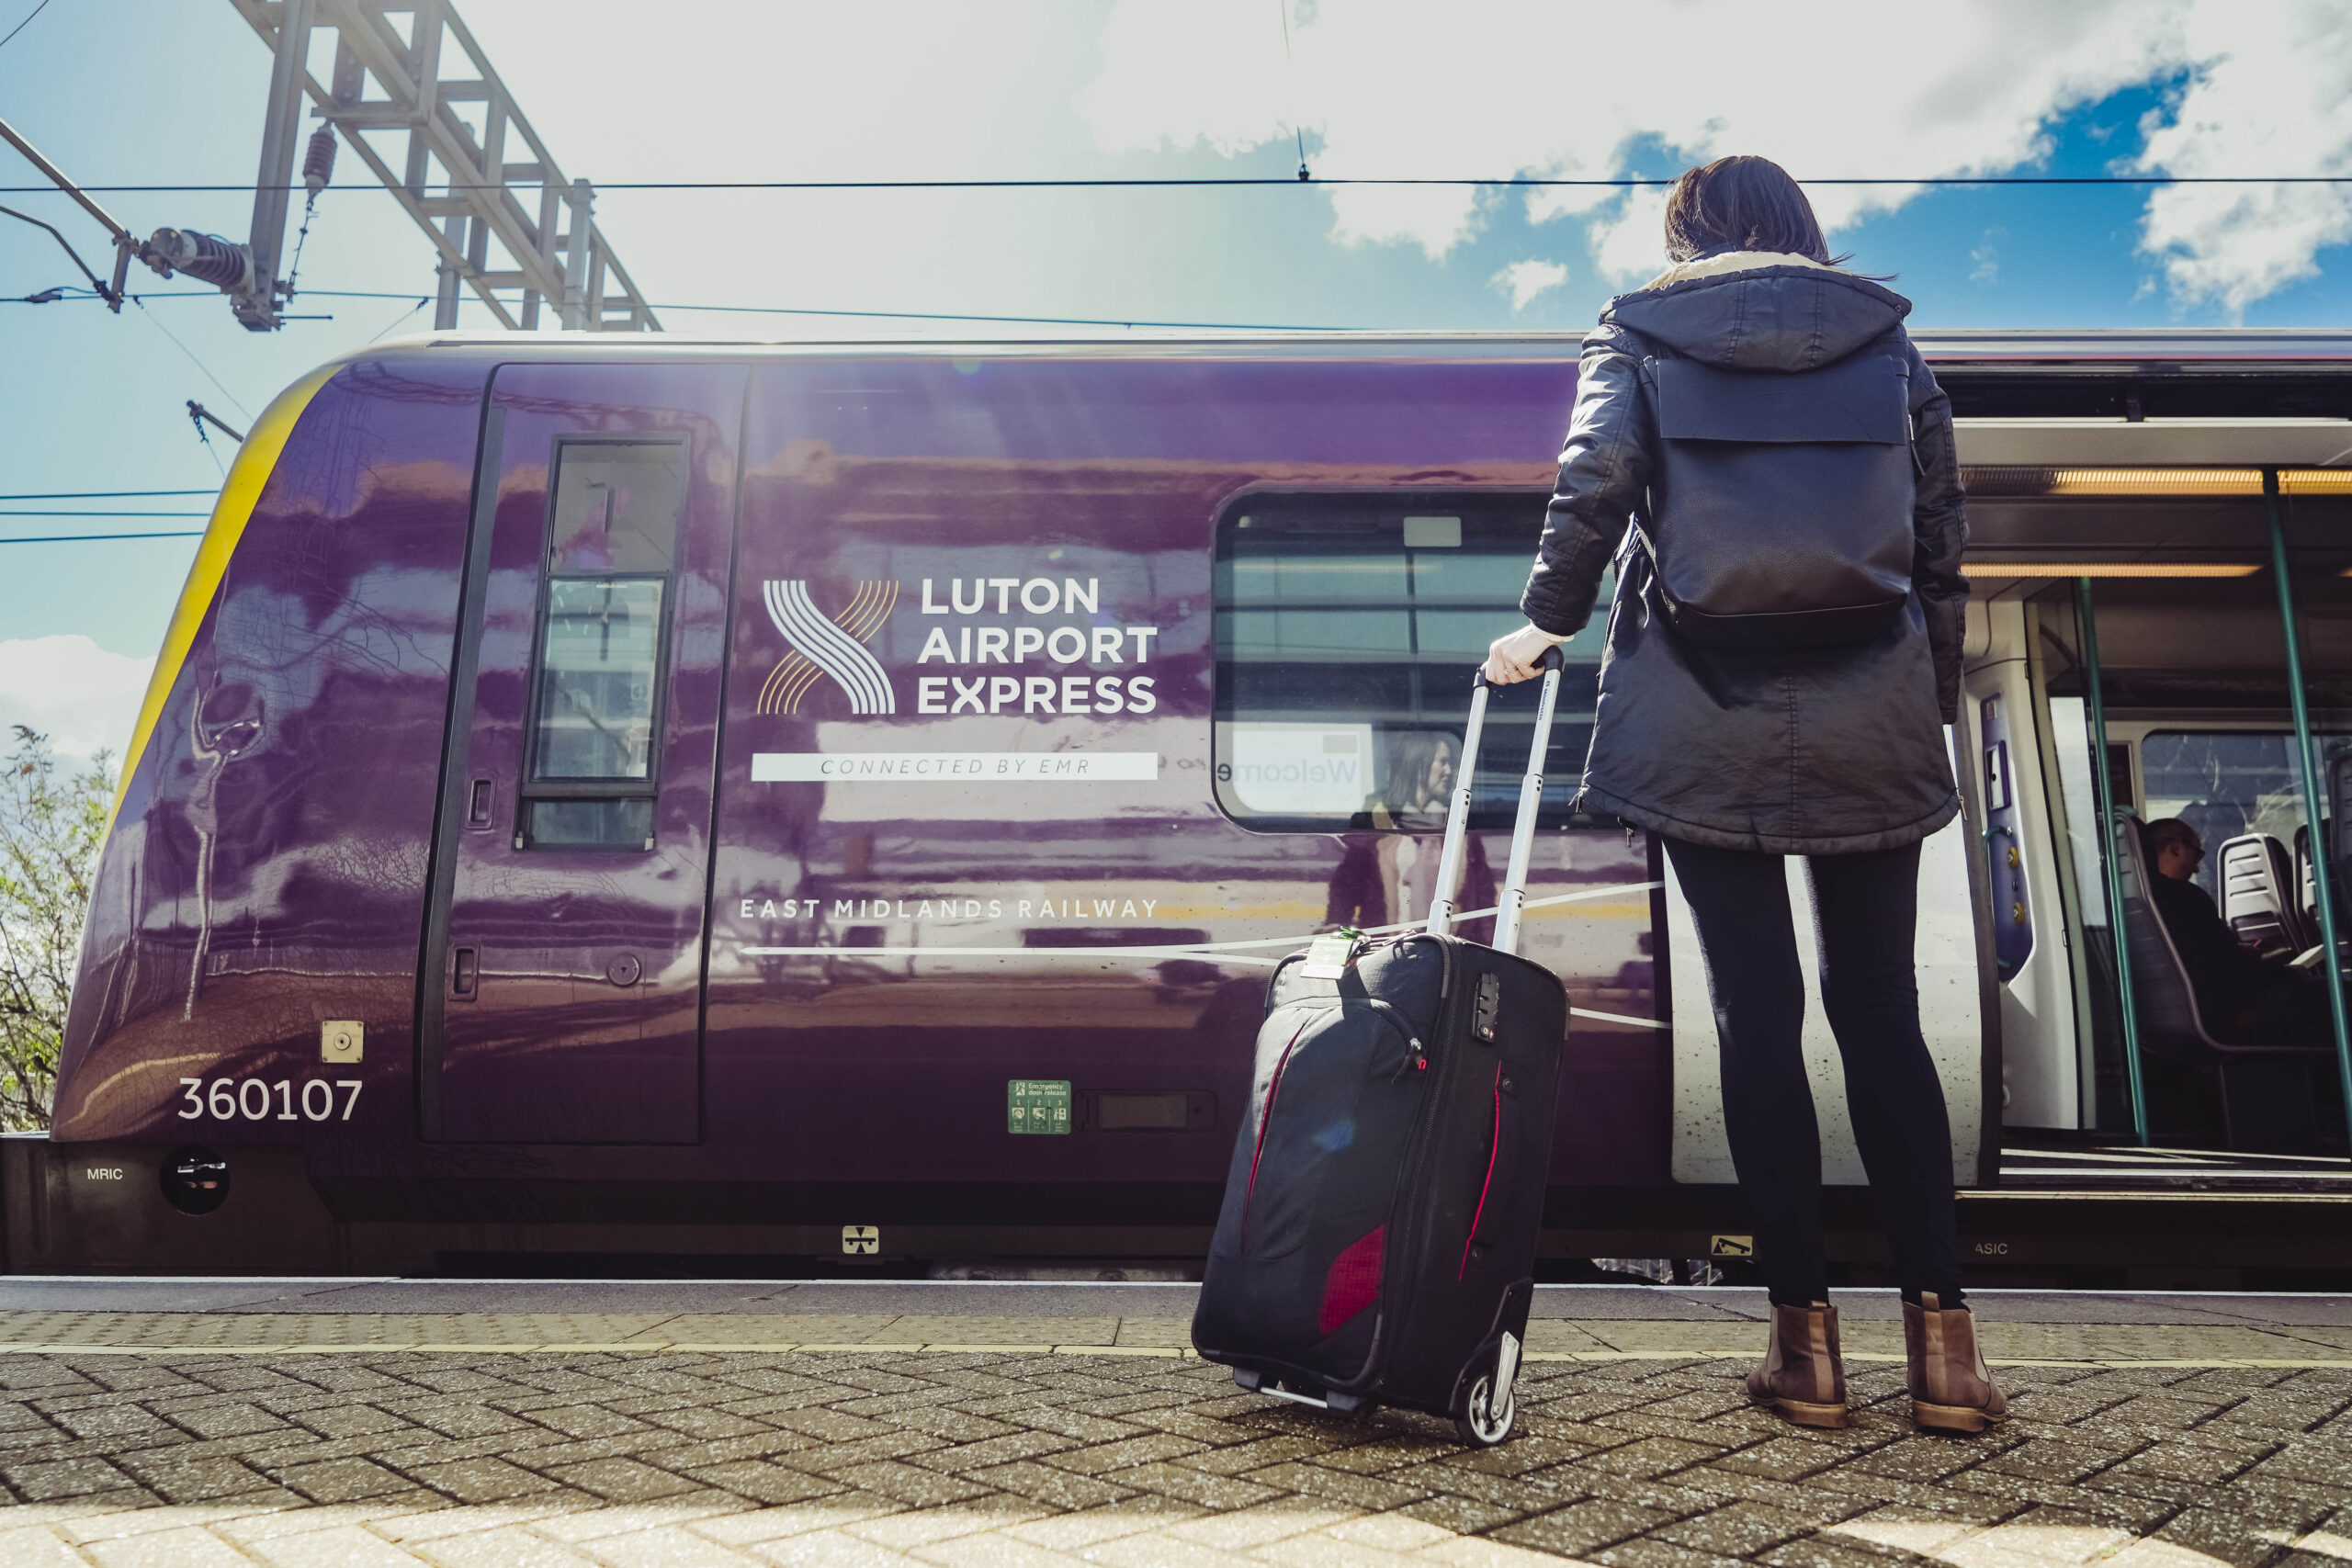 London Luton Airport (LLA) passengers travelling via the Luton Airport Express are set to benefit from revamped facilities 